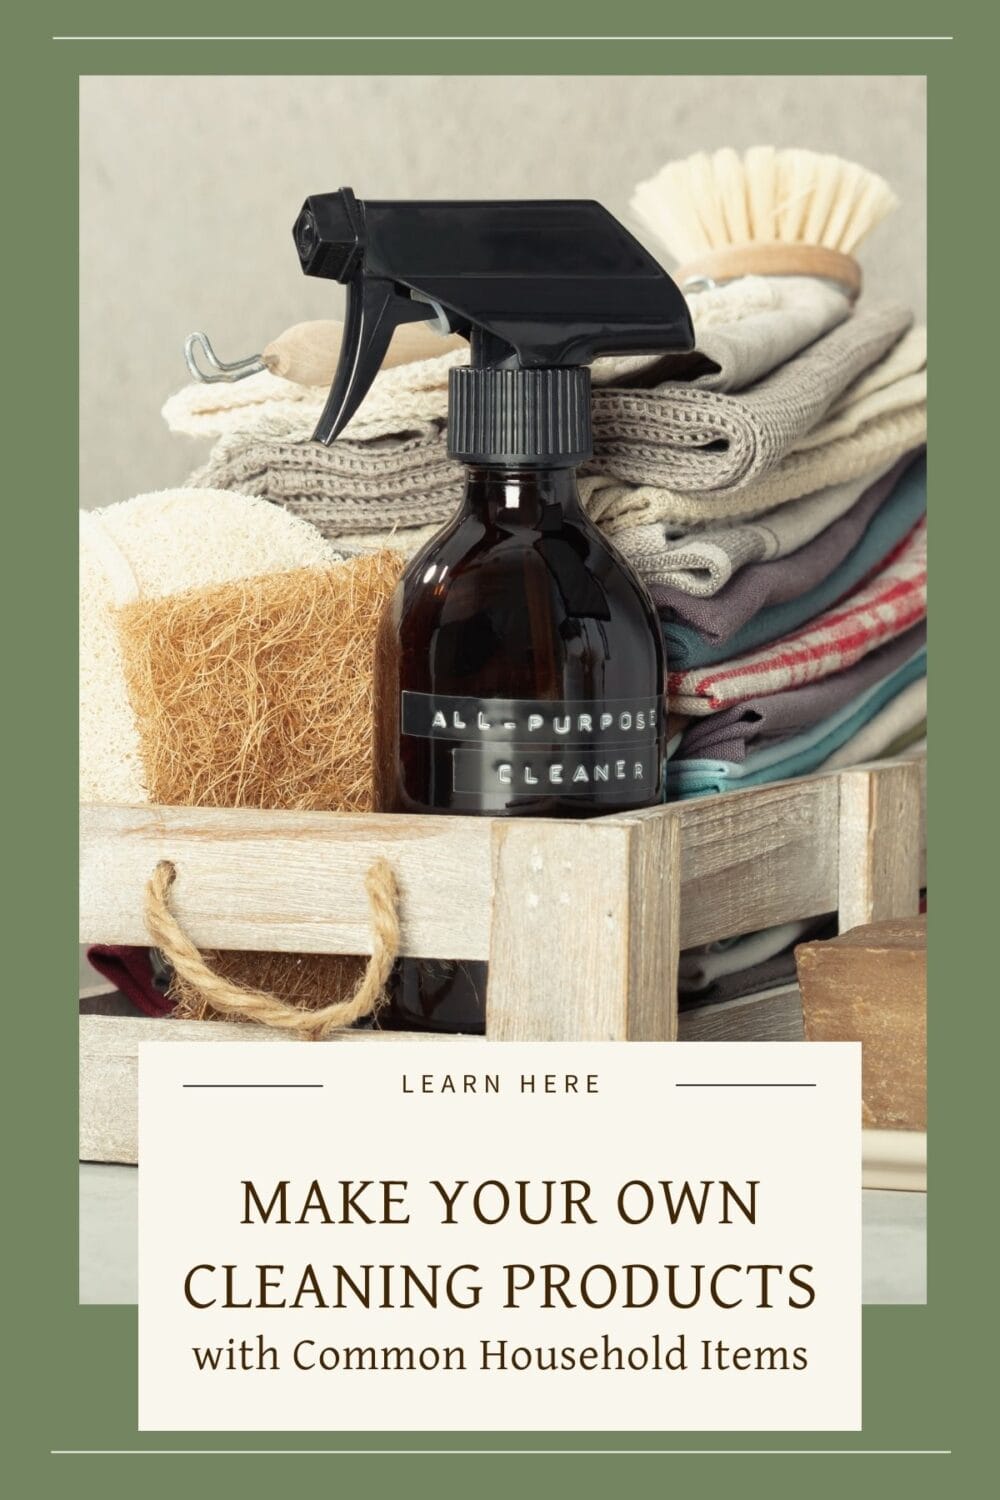 A Pinterest-friendly graphic for my post filled with homemade cleaning product recipes that are natural and safe.